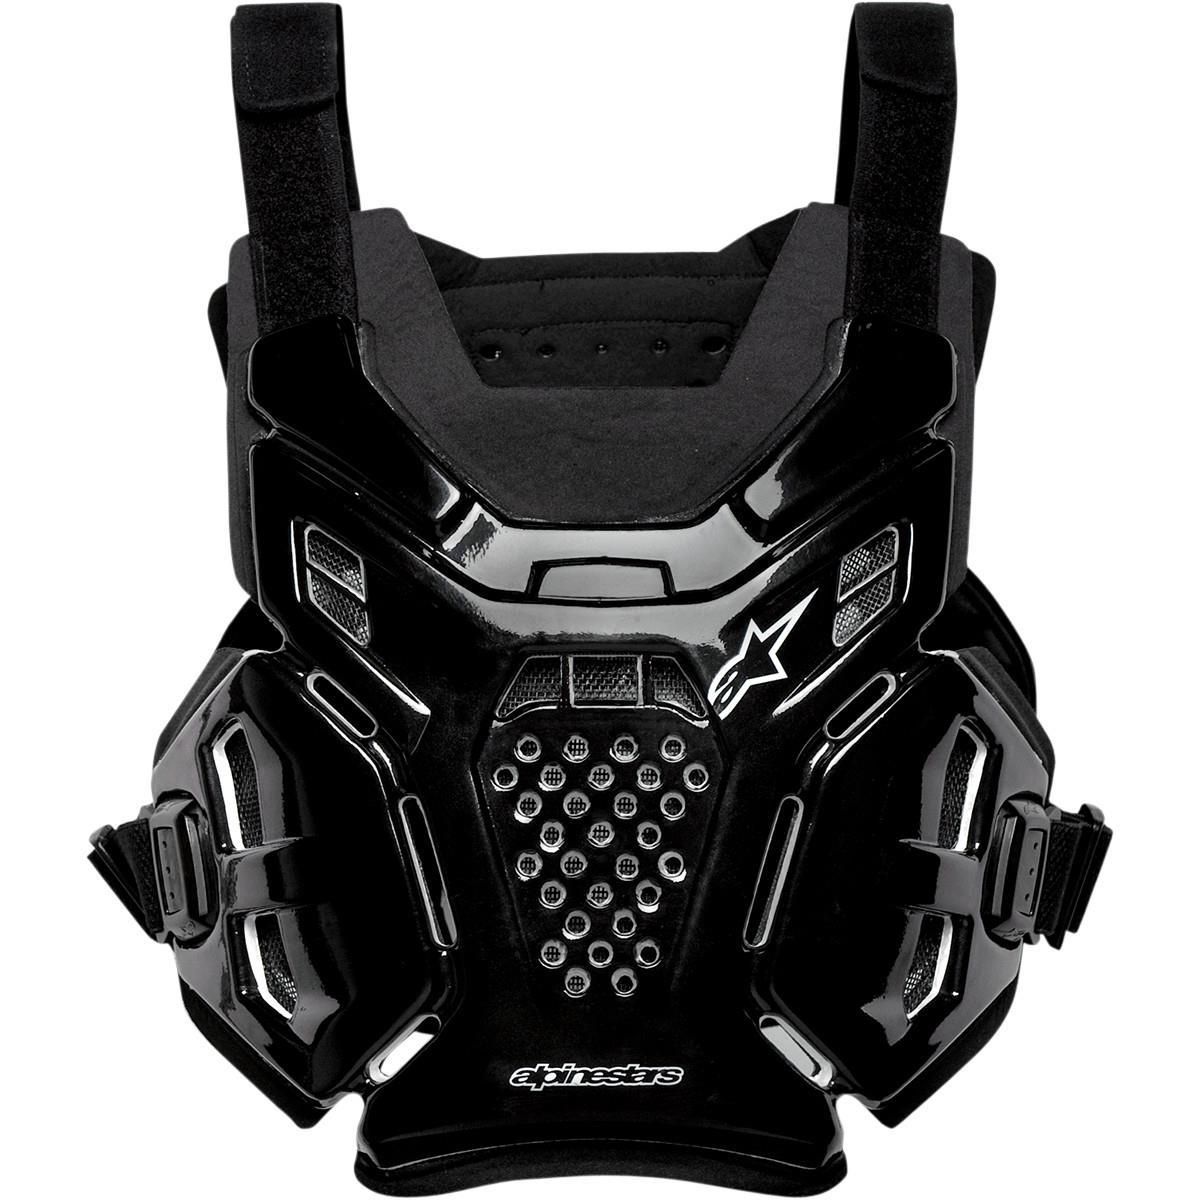 2G1R-ALPINESTAR-6700211-321 A-6 Under The Jersey Protector